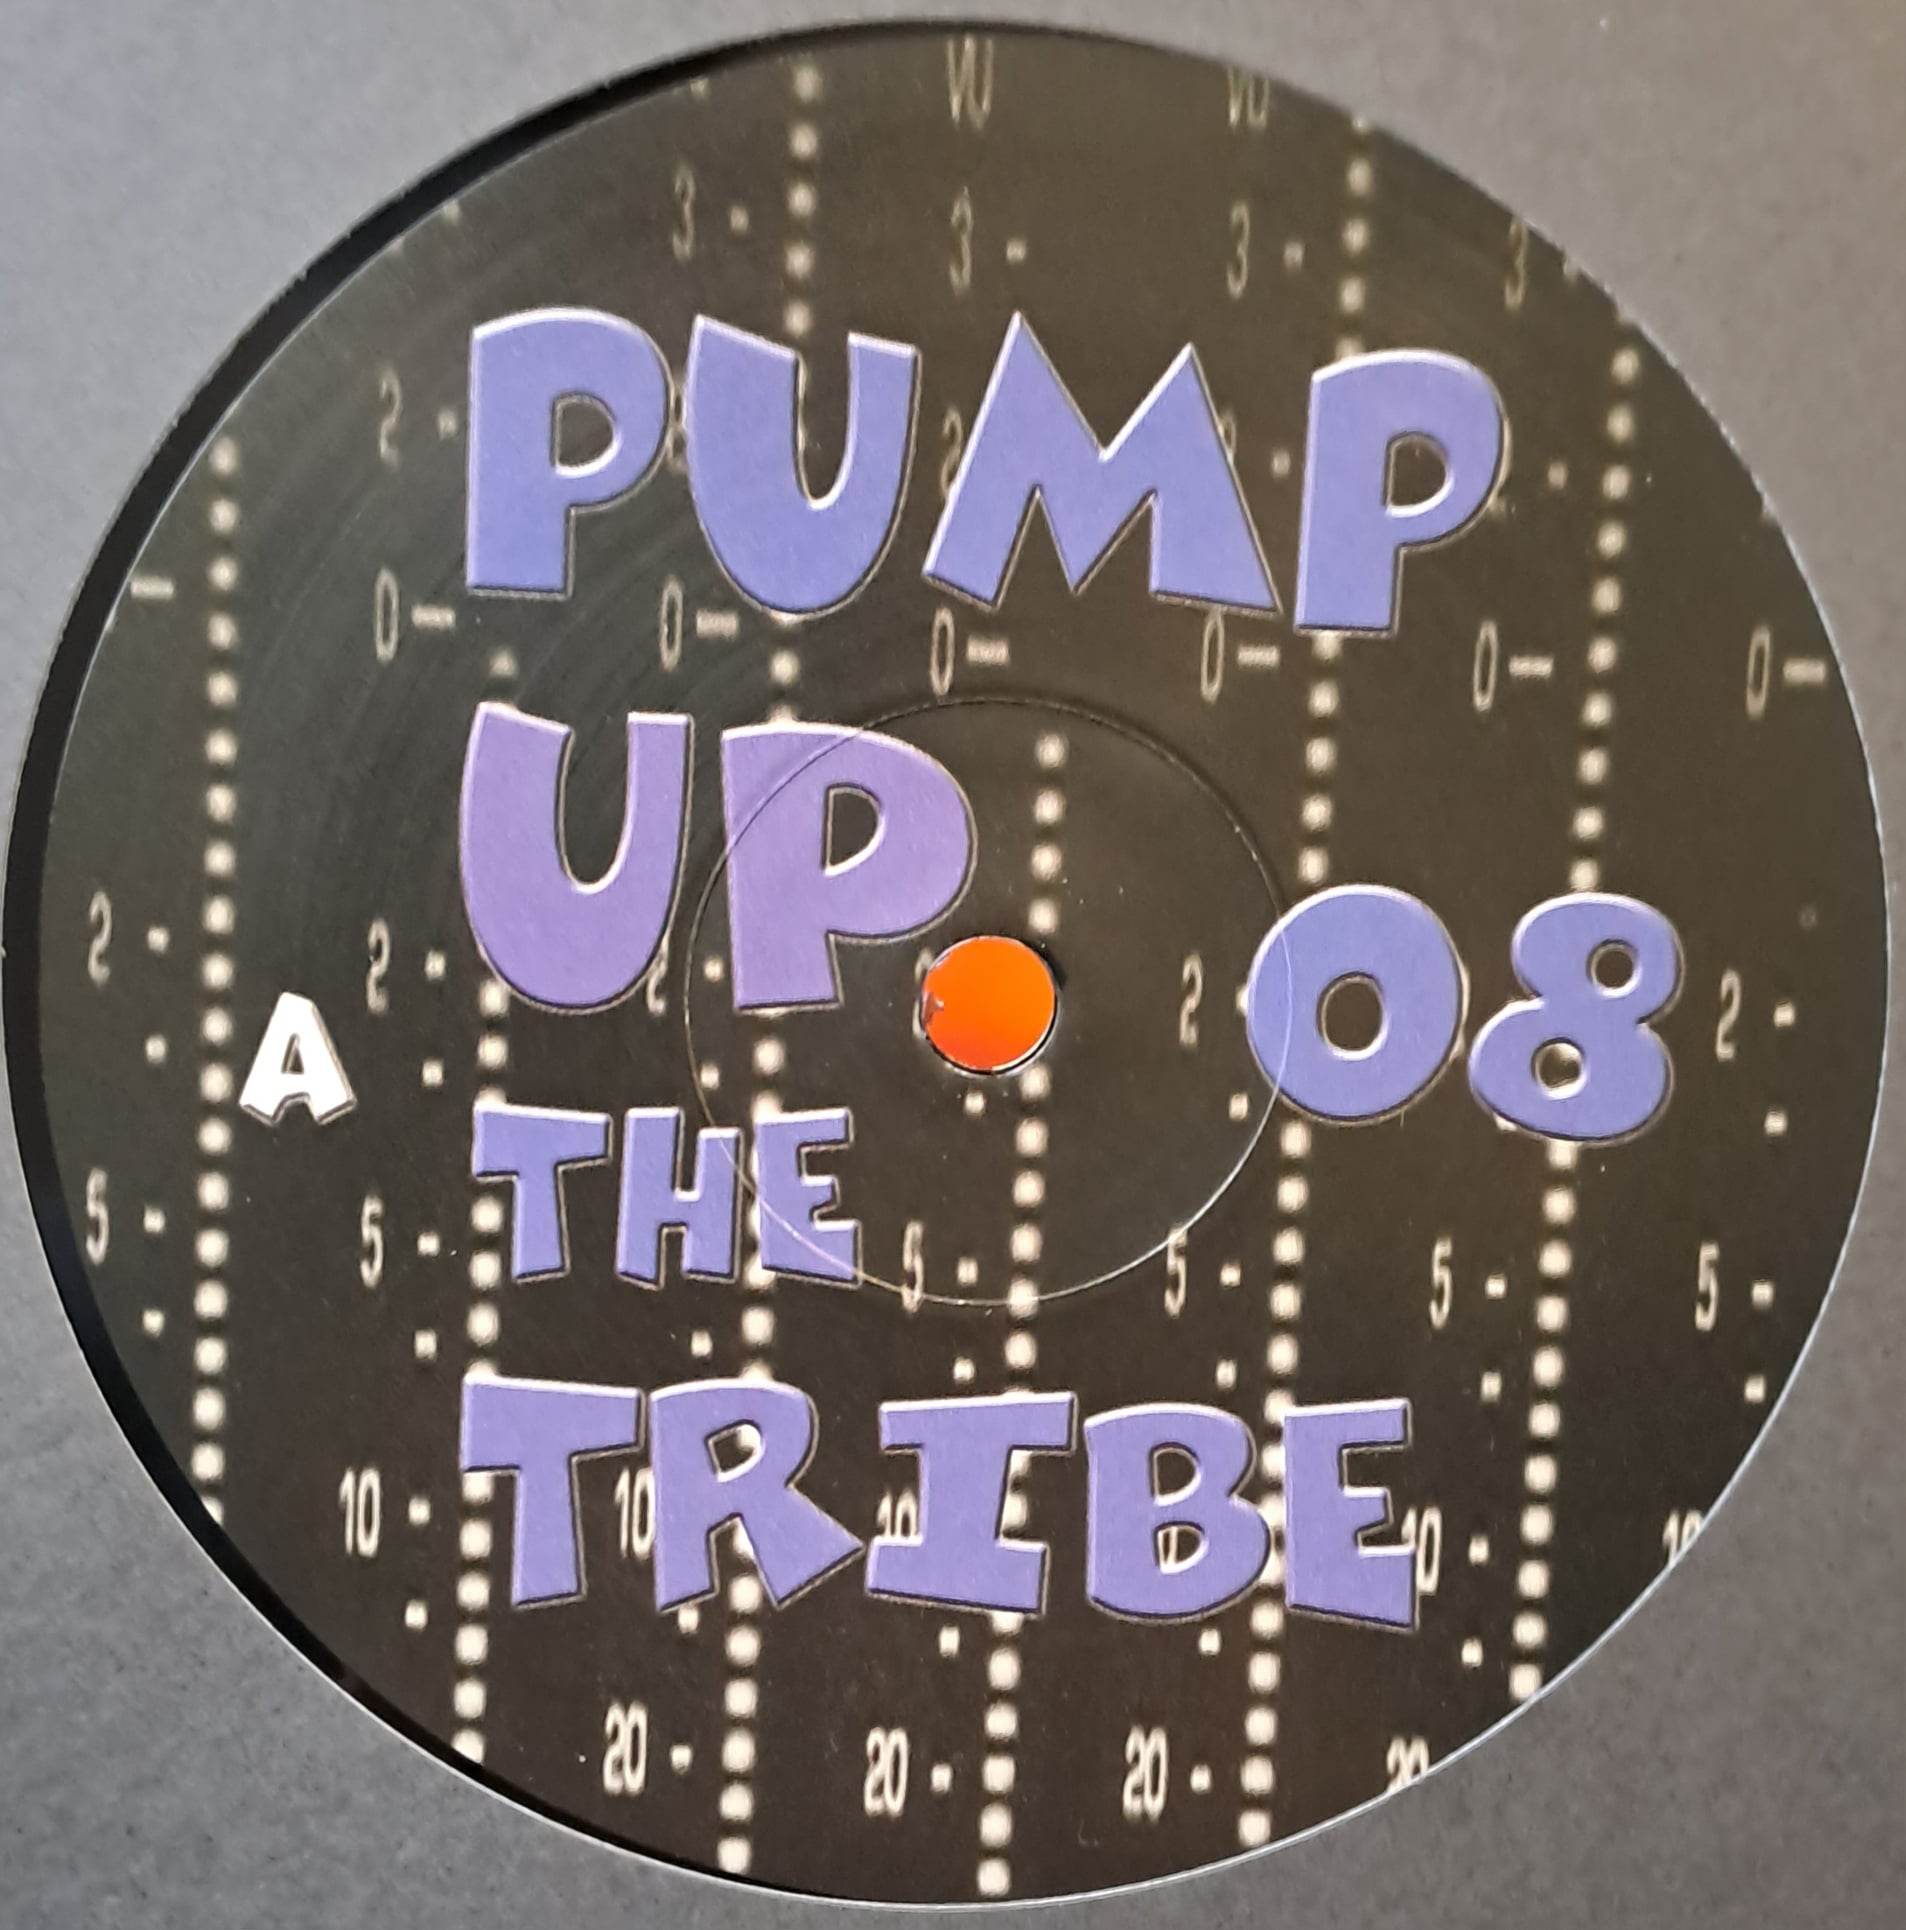 Pump Up The Tribe 08 - vinyle tribe